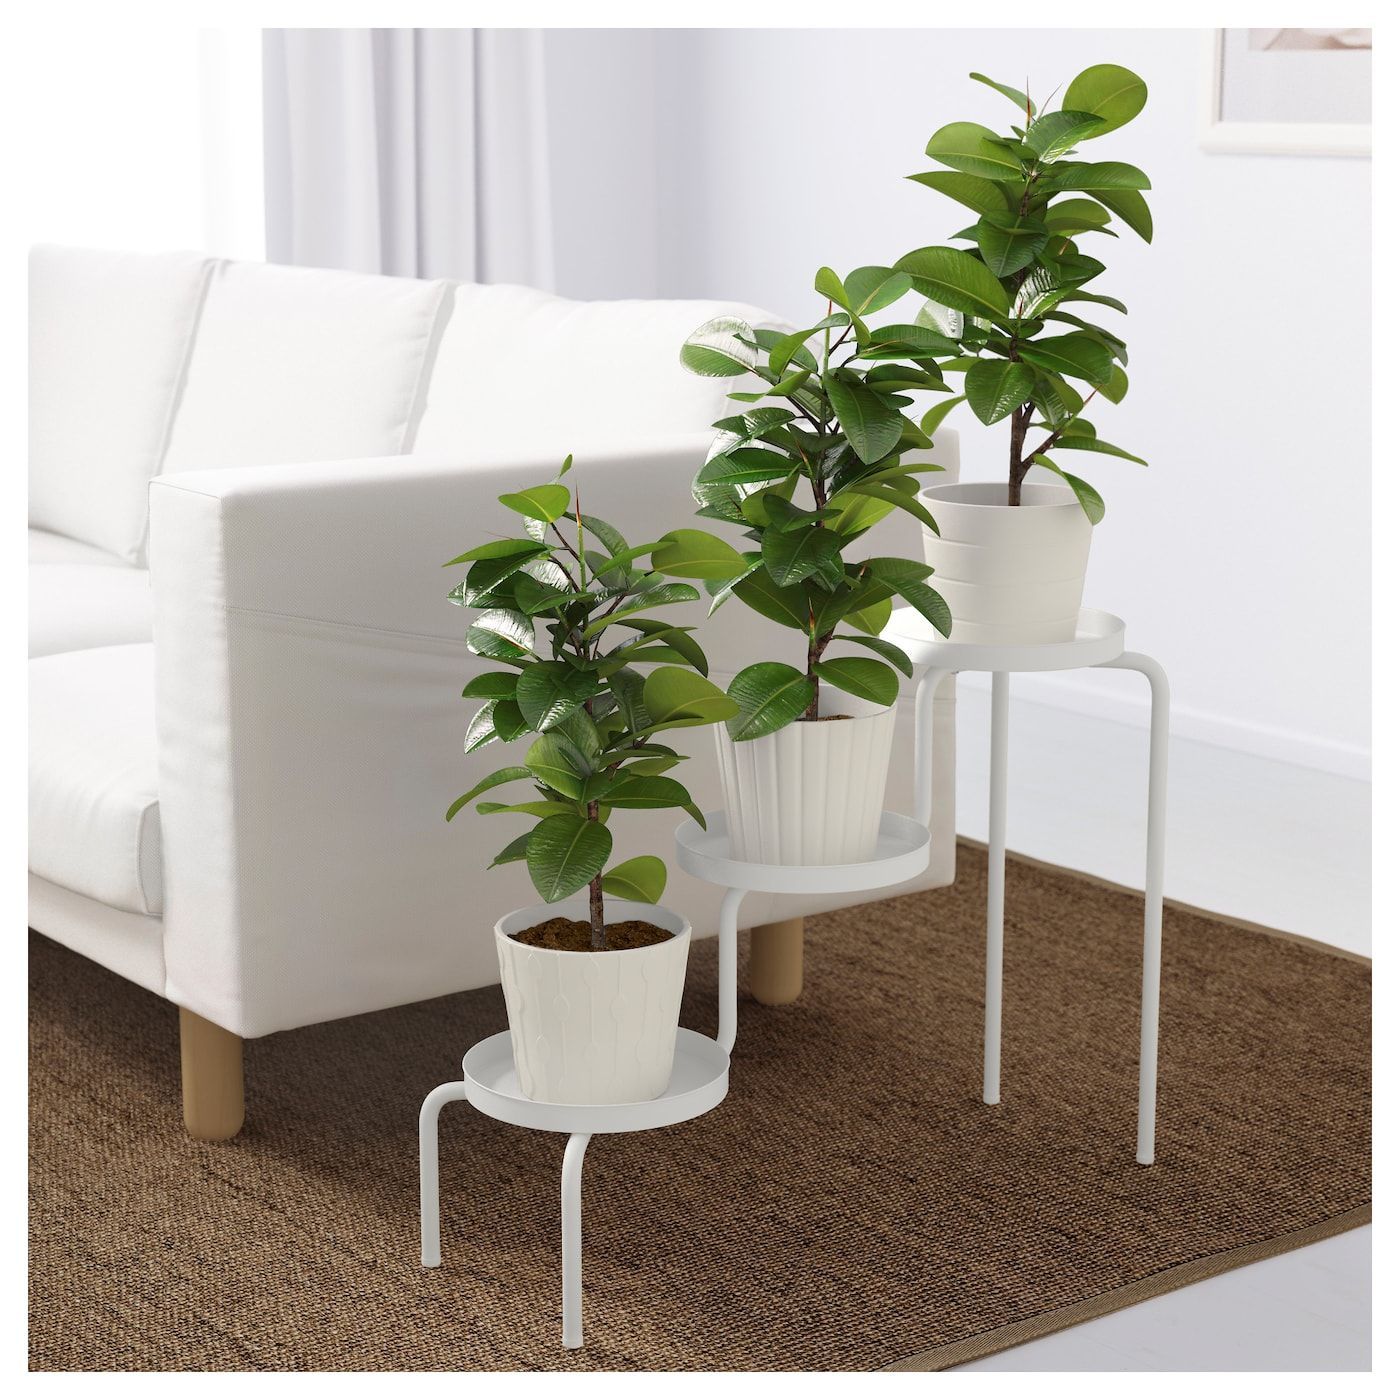 IKEA - PS 2014 Plant stand indoor/outdoor white, white -   13 pidestall plants Stand ideas